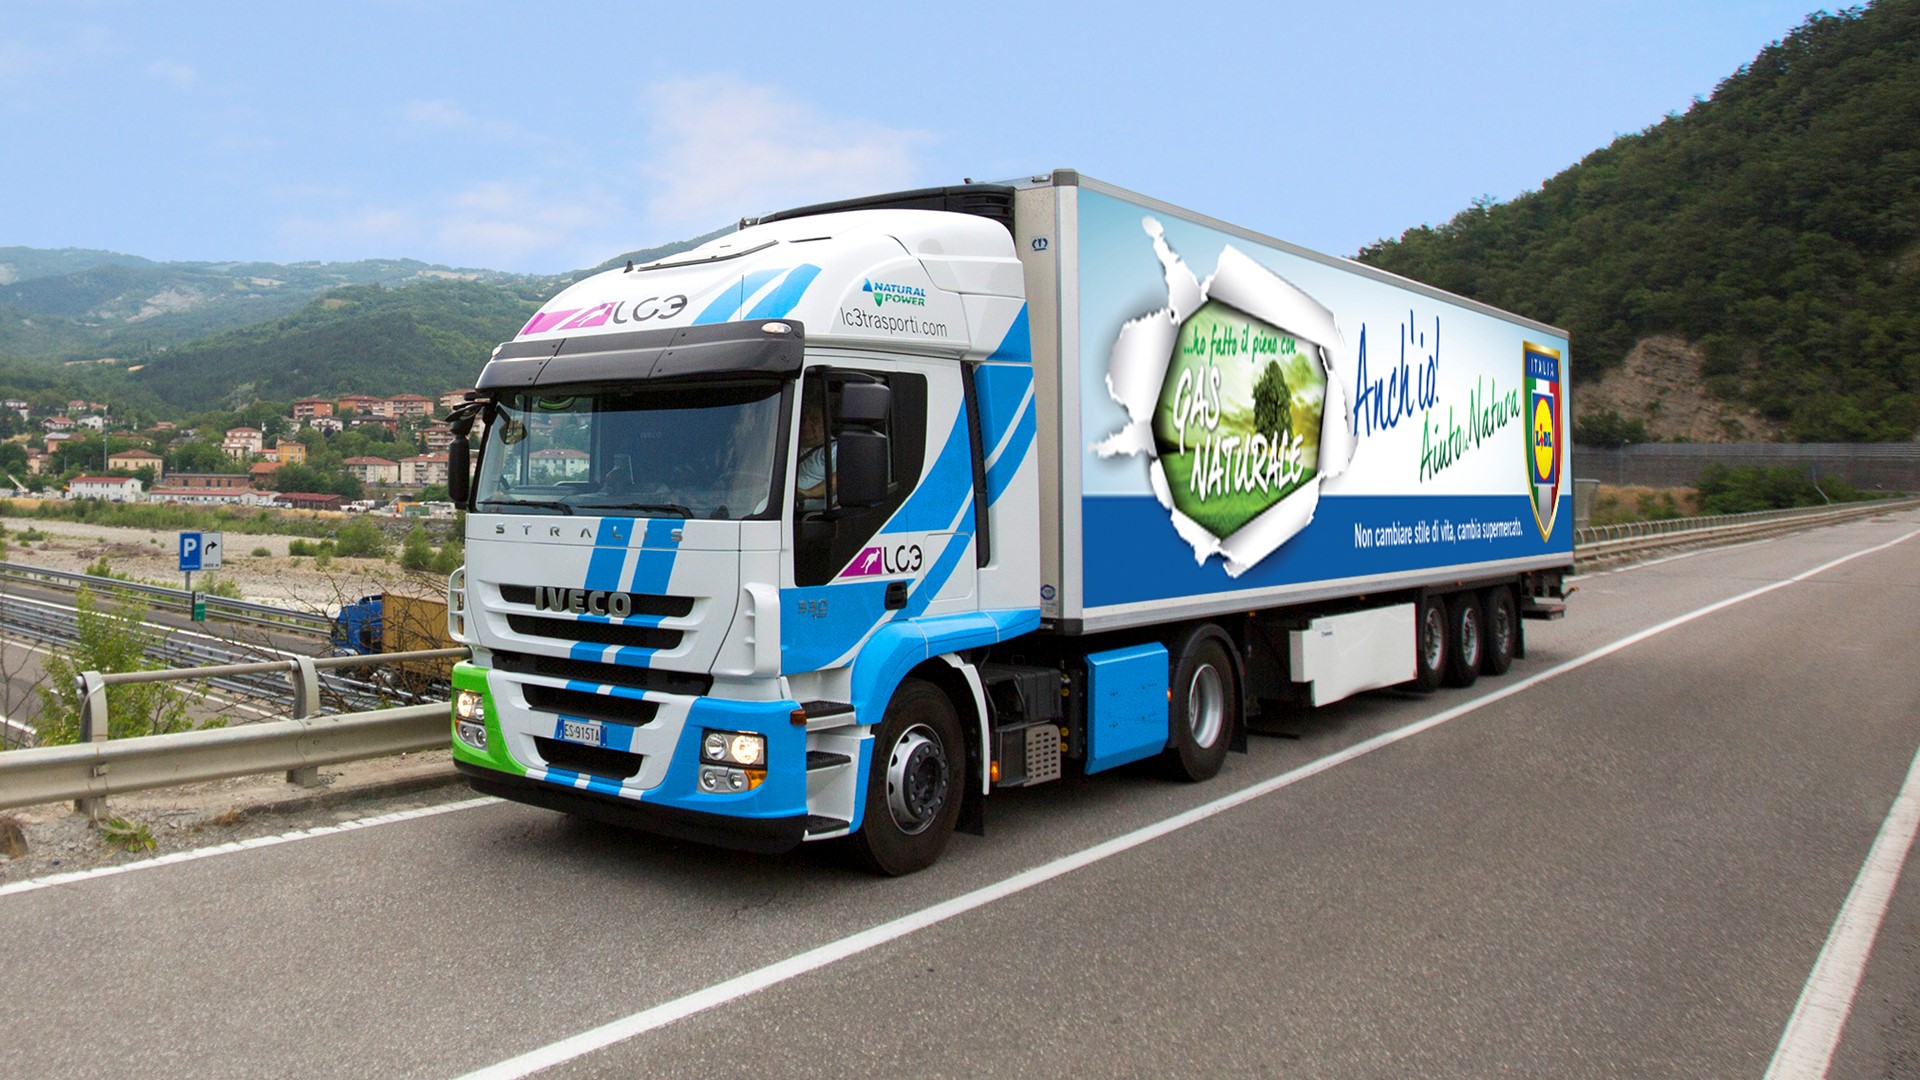 Iveco Stralis LC3 for supermarket chain Lidl in Italy